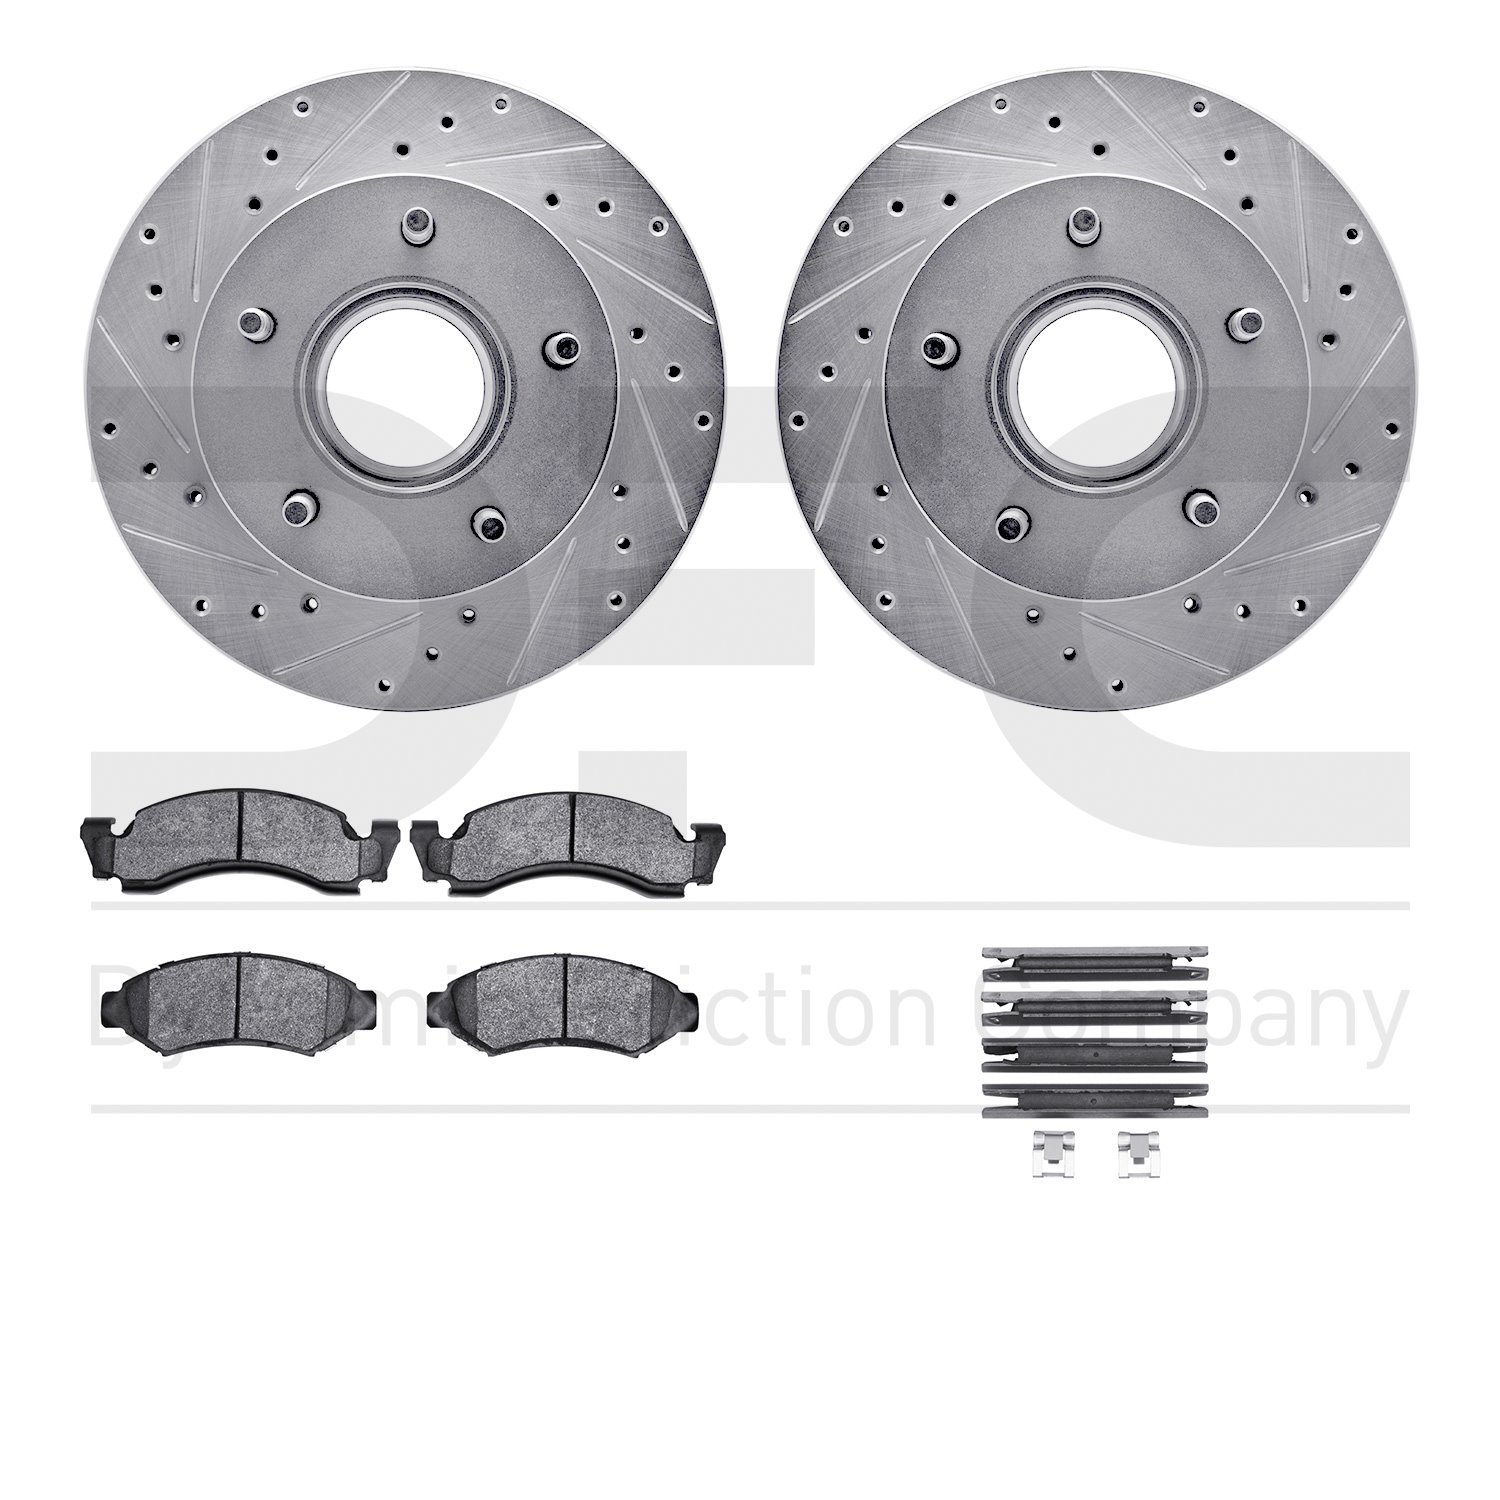 7412-54014 Drilled/Slotted Brake Rotors with Ultimate-Duty Brake Pads Kit & Hardware [Silver], 1986-1988 Ford/Lincoln/Mercury/Ma